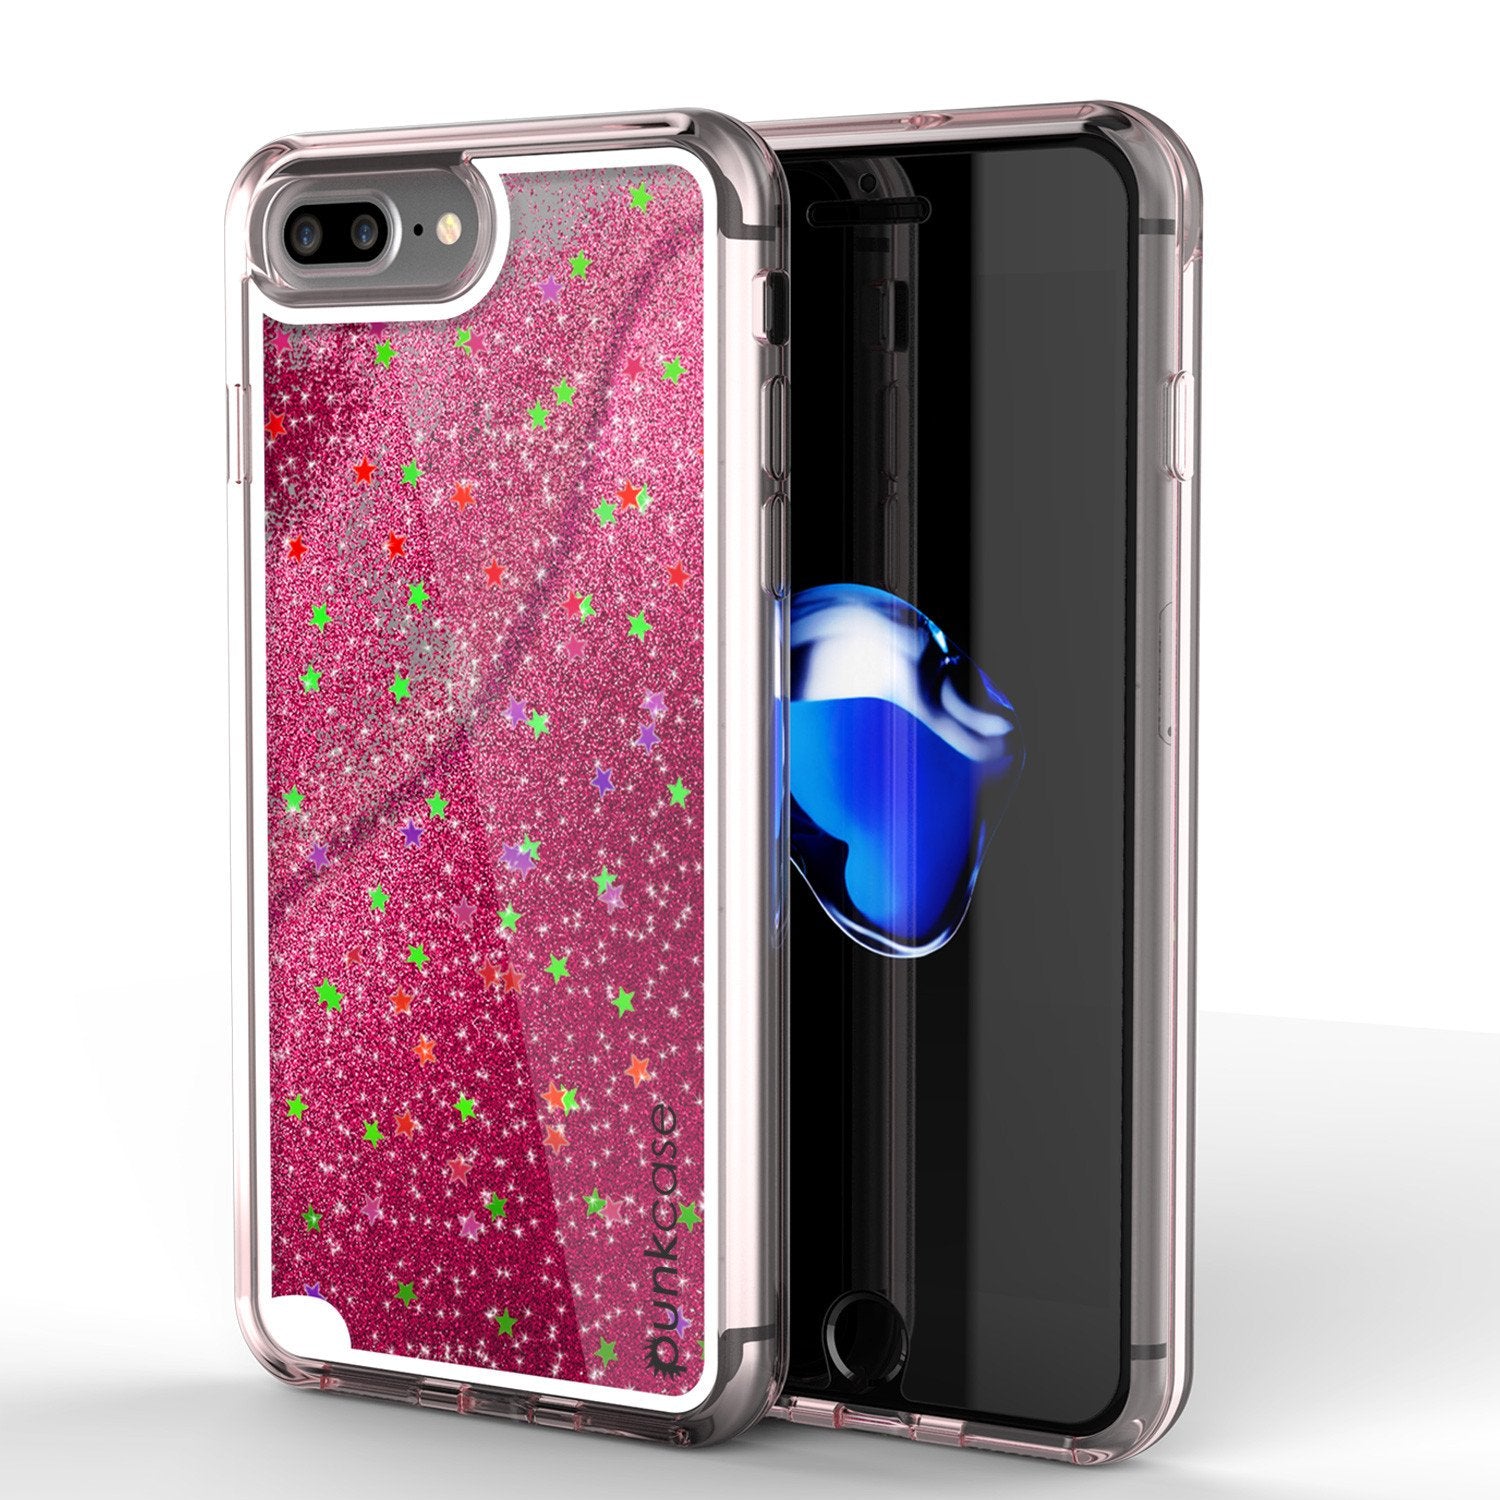 iPhone 8+ Plus Case, Punkcase [Liquid Silver Series] Protective Dual Layer Floating Glitter ...